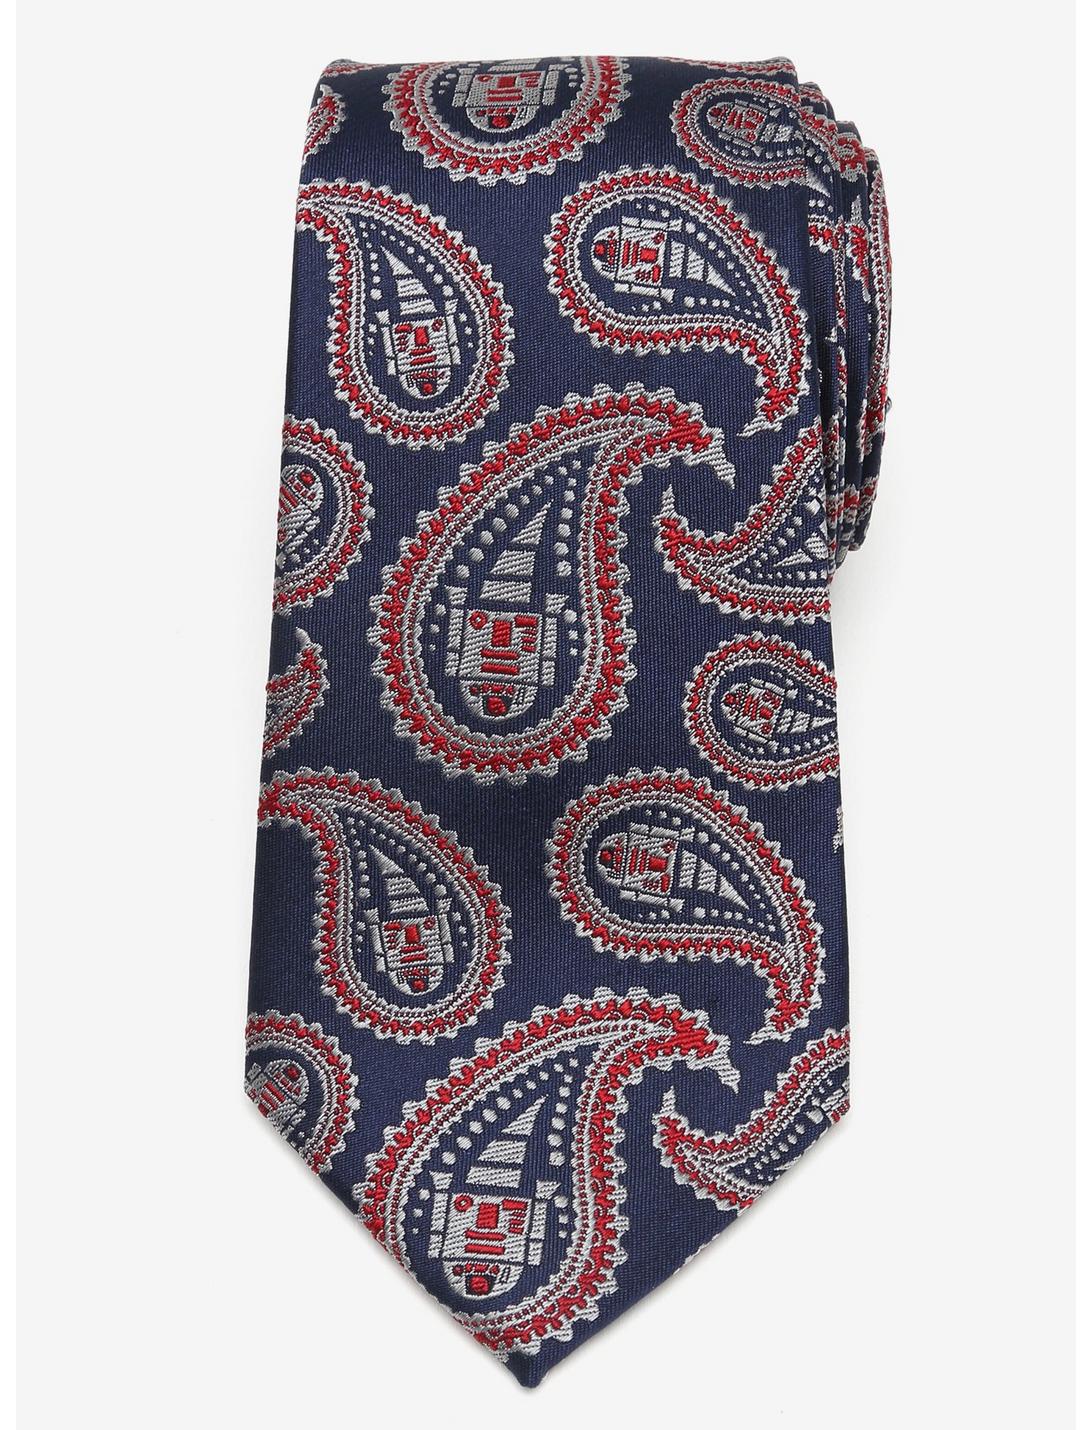 Star Wars R2D2 Blue and Red Paisley Tie, , hi-res